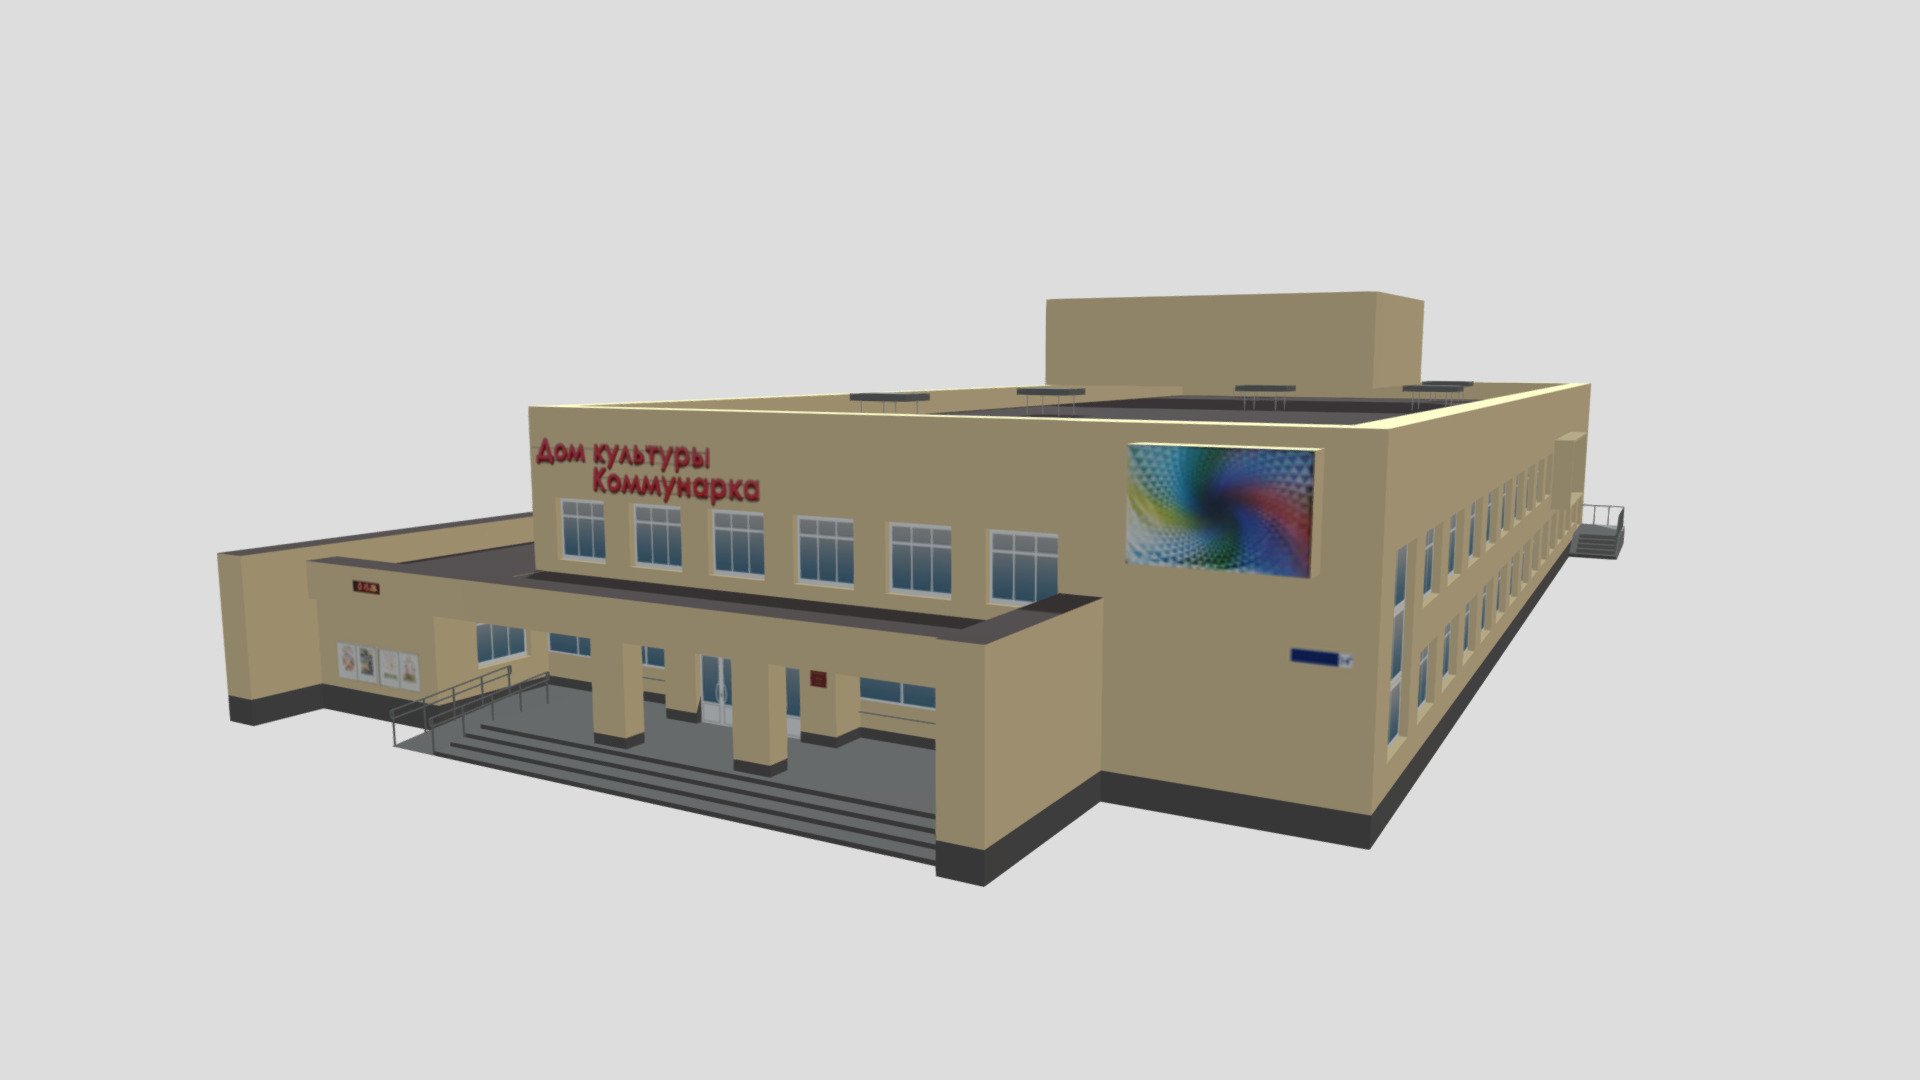 One of the typical public buildings of the house of culture in Russia 3d model